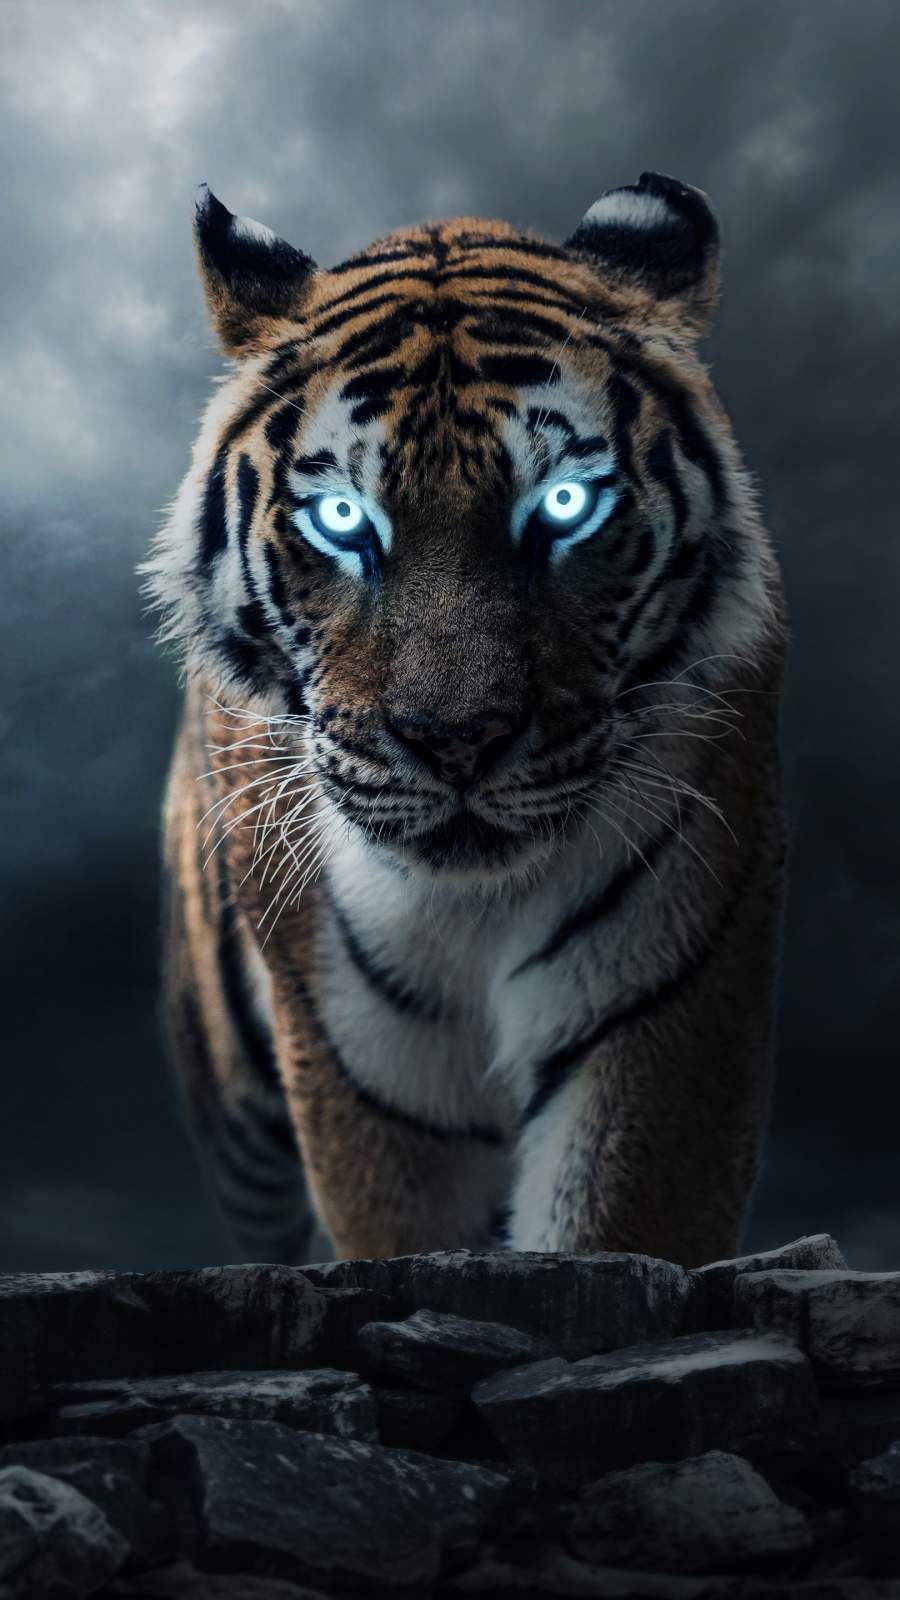 Ultra HD Tiger HD Wallpaper For Mobile